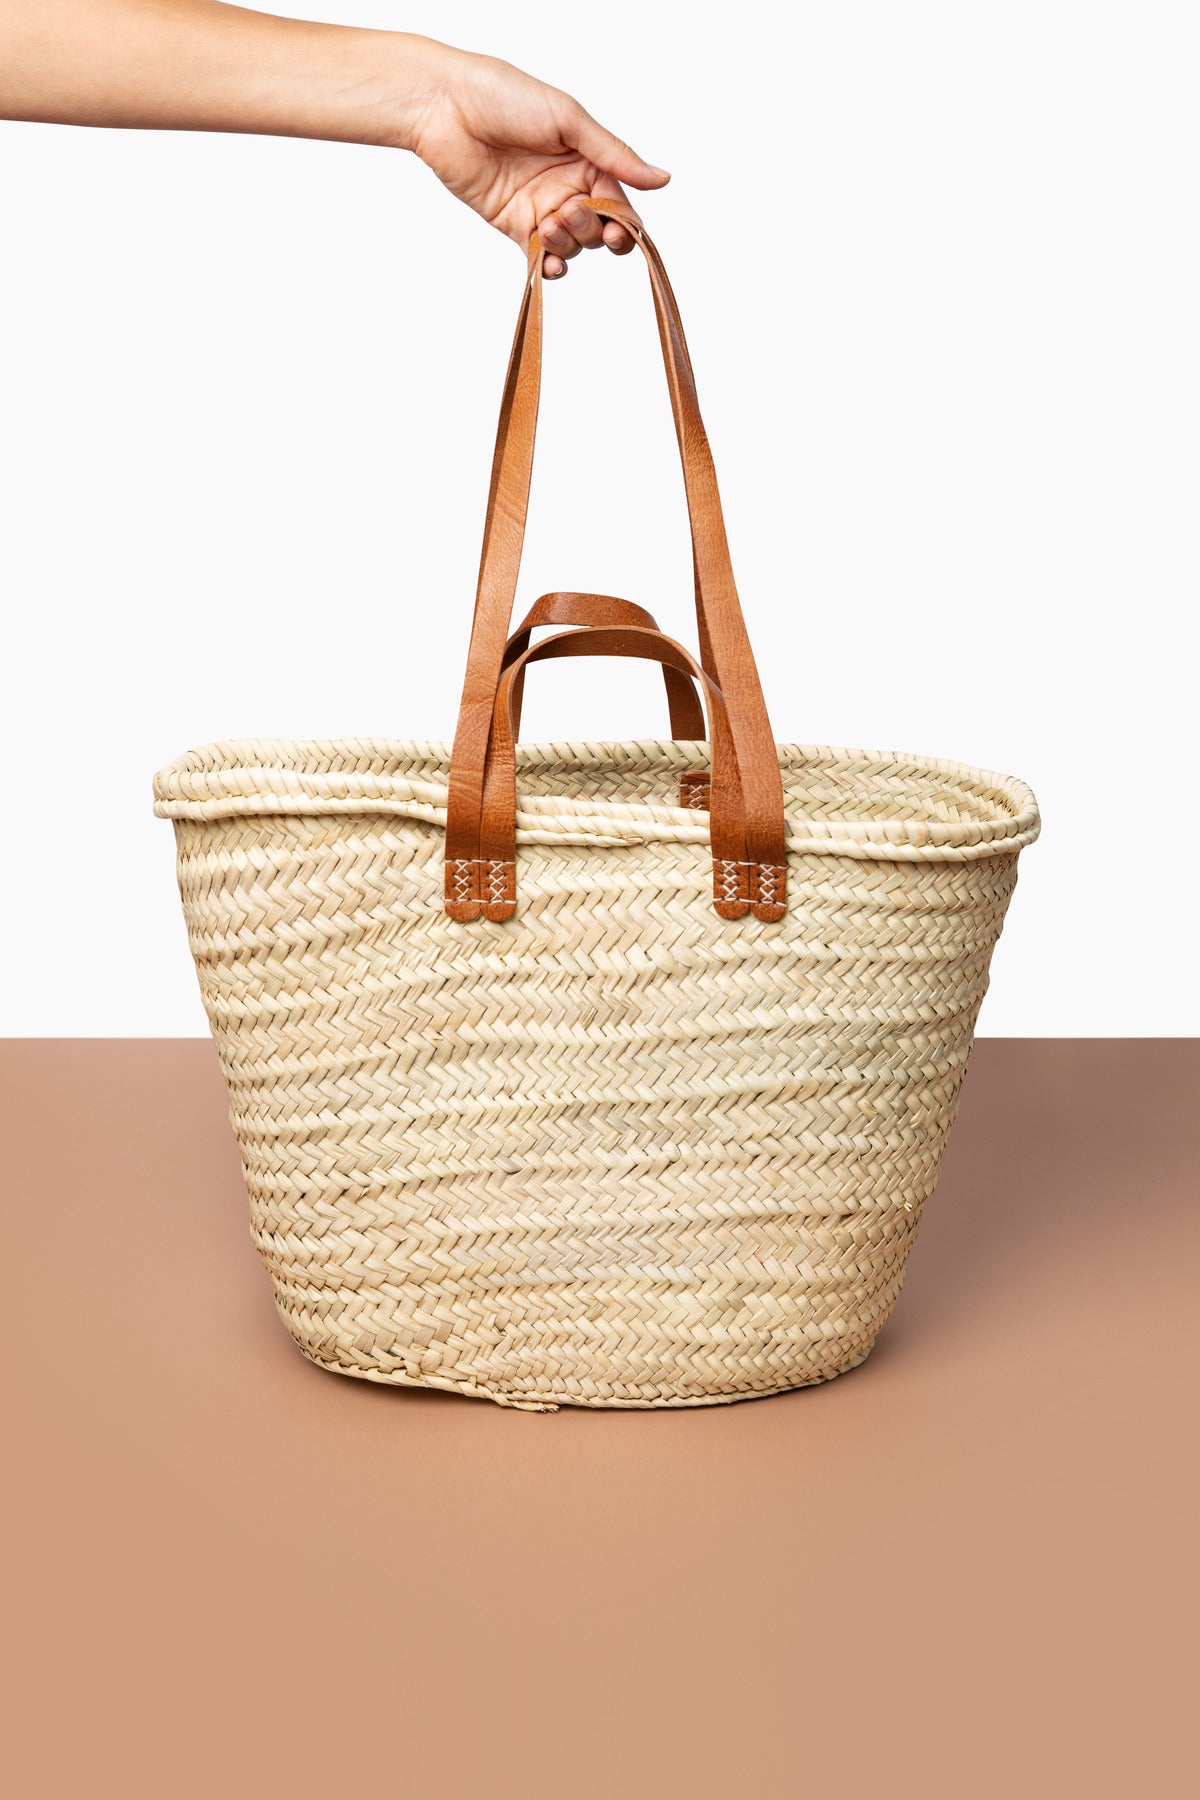 Handmade Large Straw French Baskets with Leather Straps